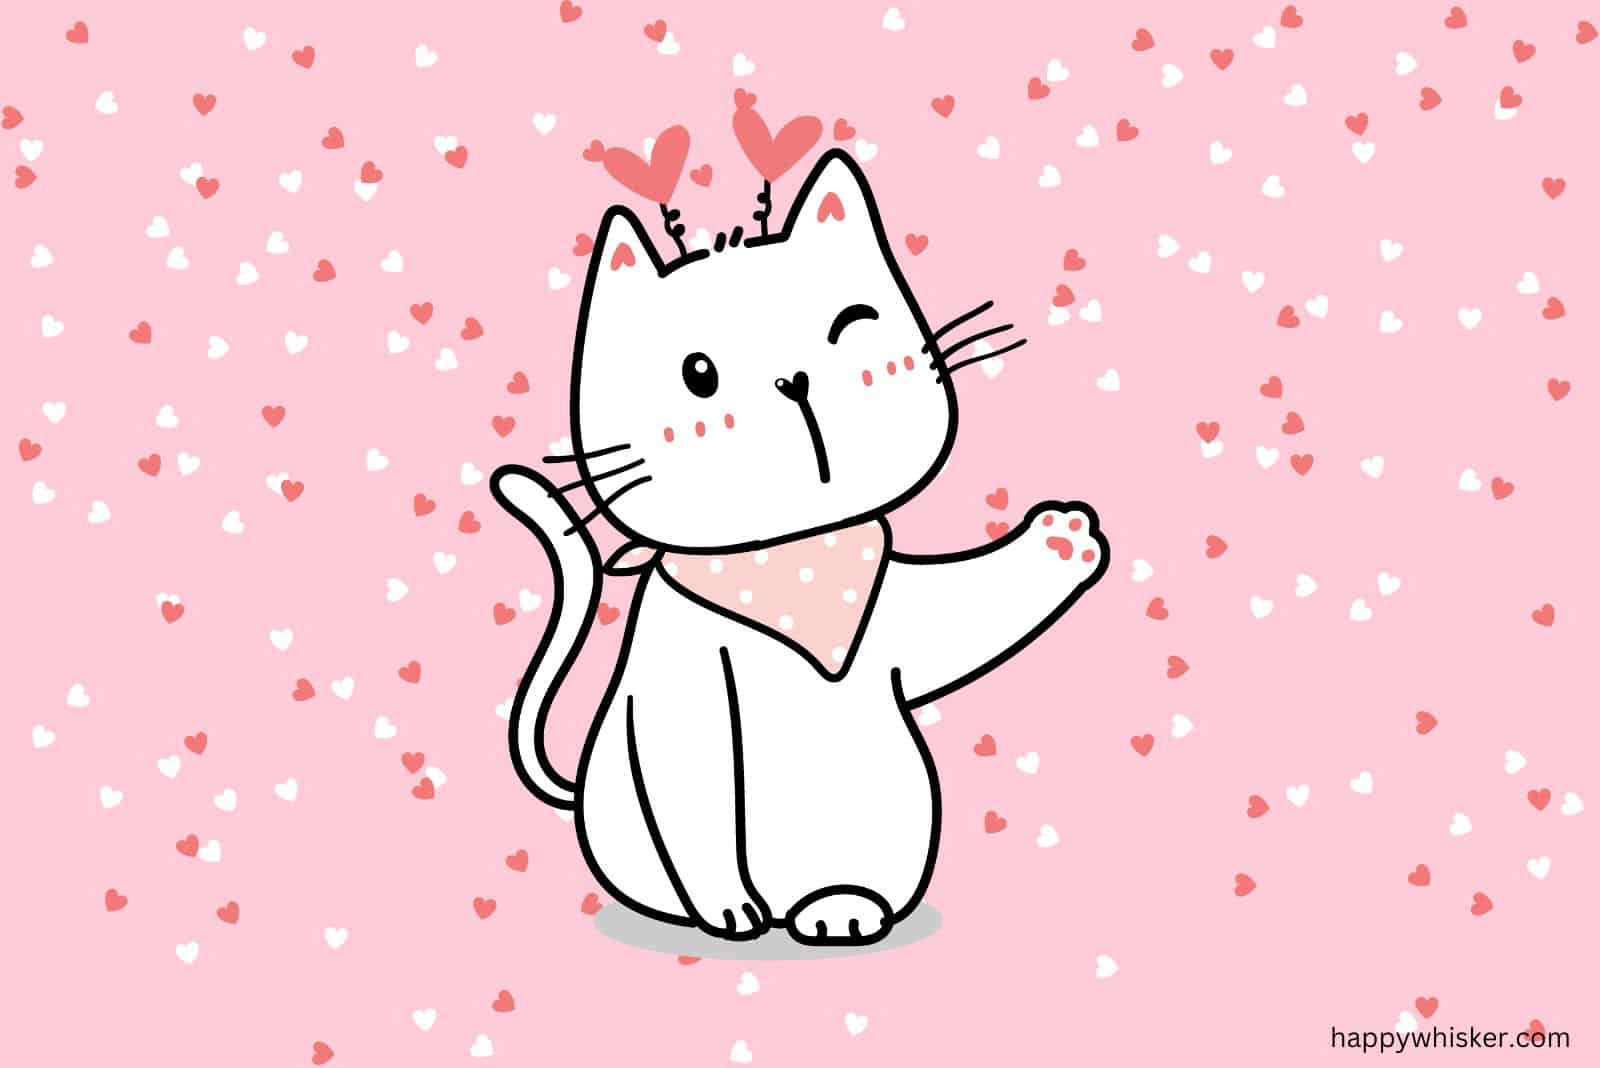 cute cat with hearts in the background